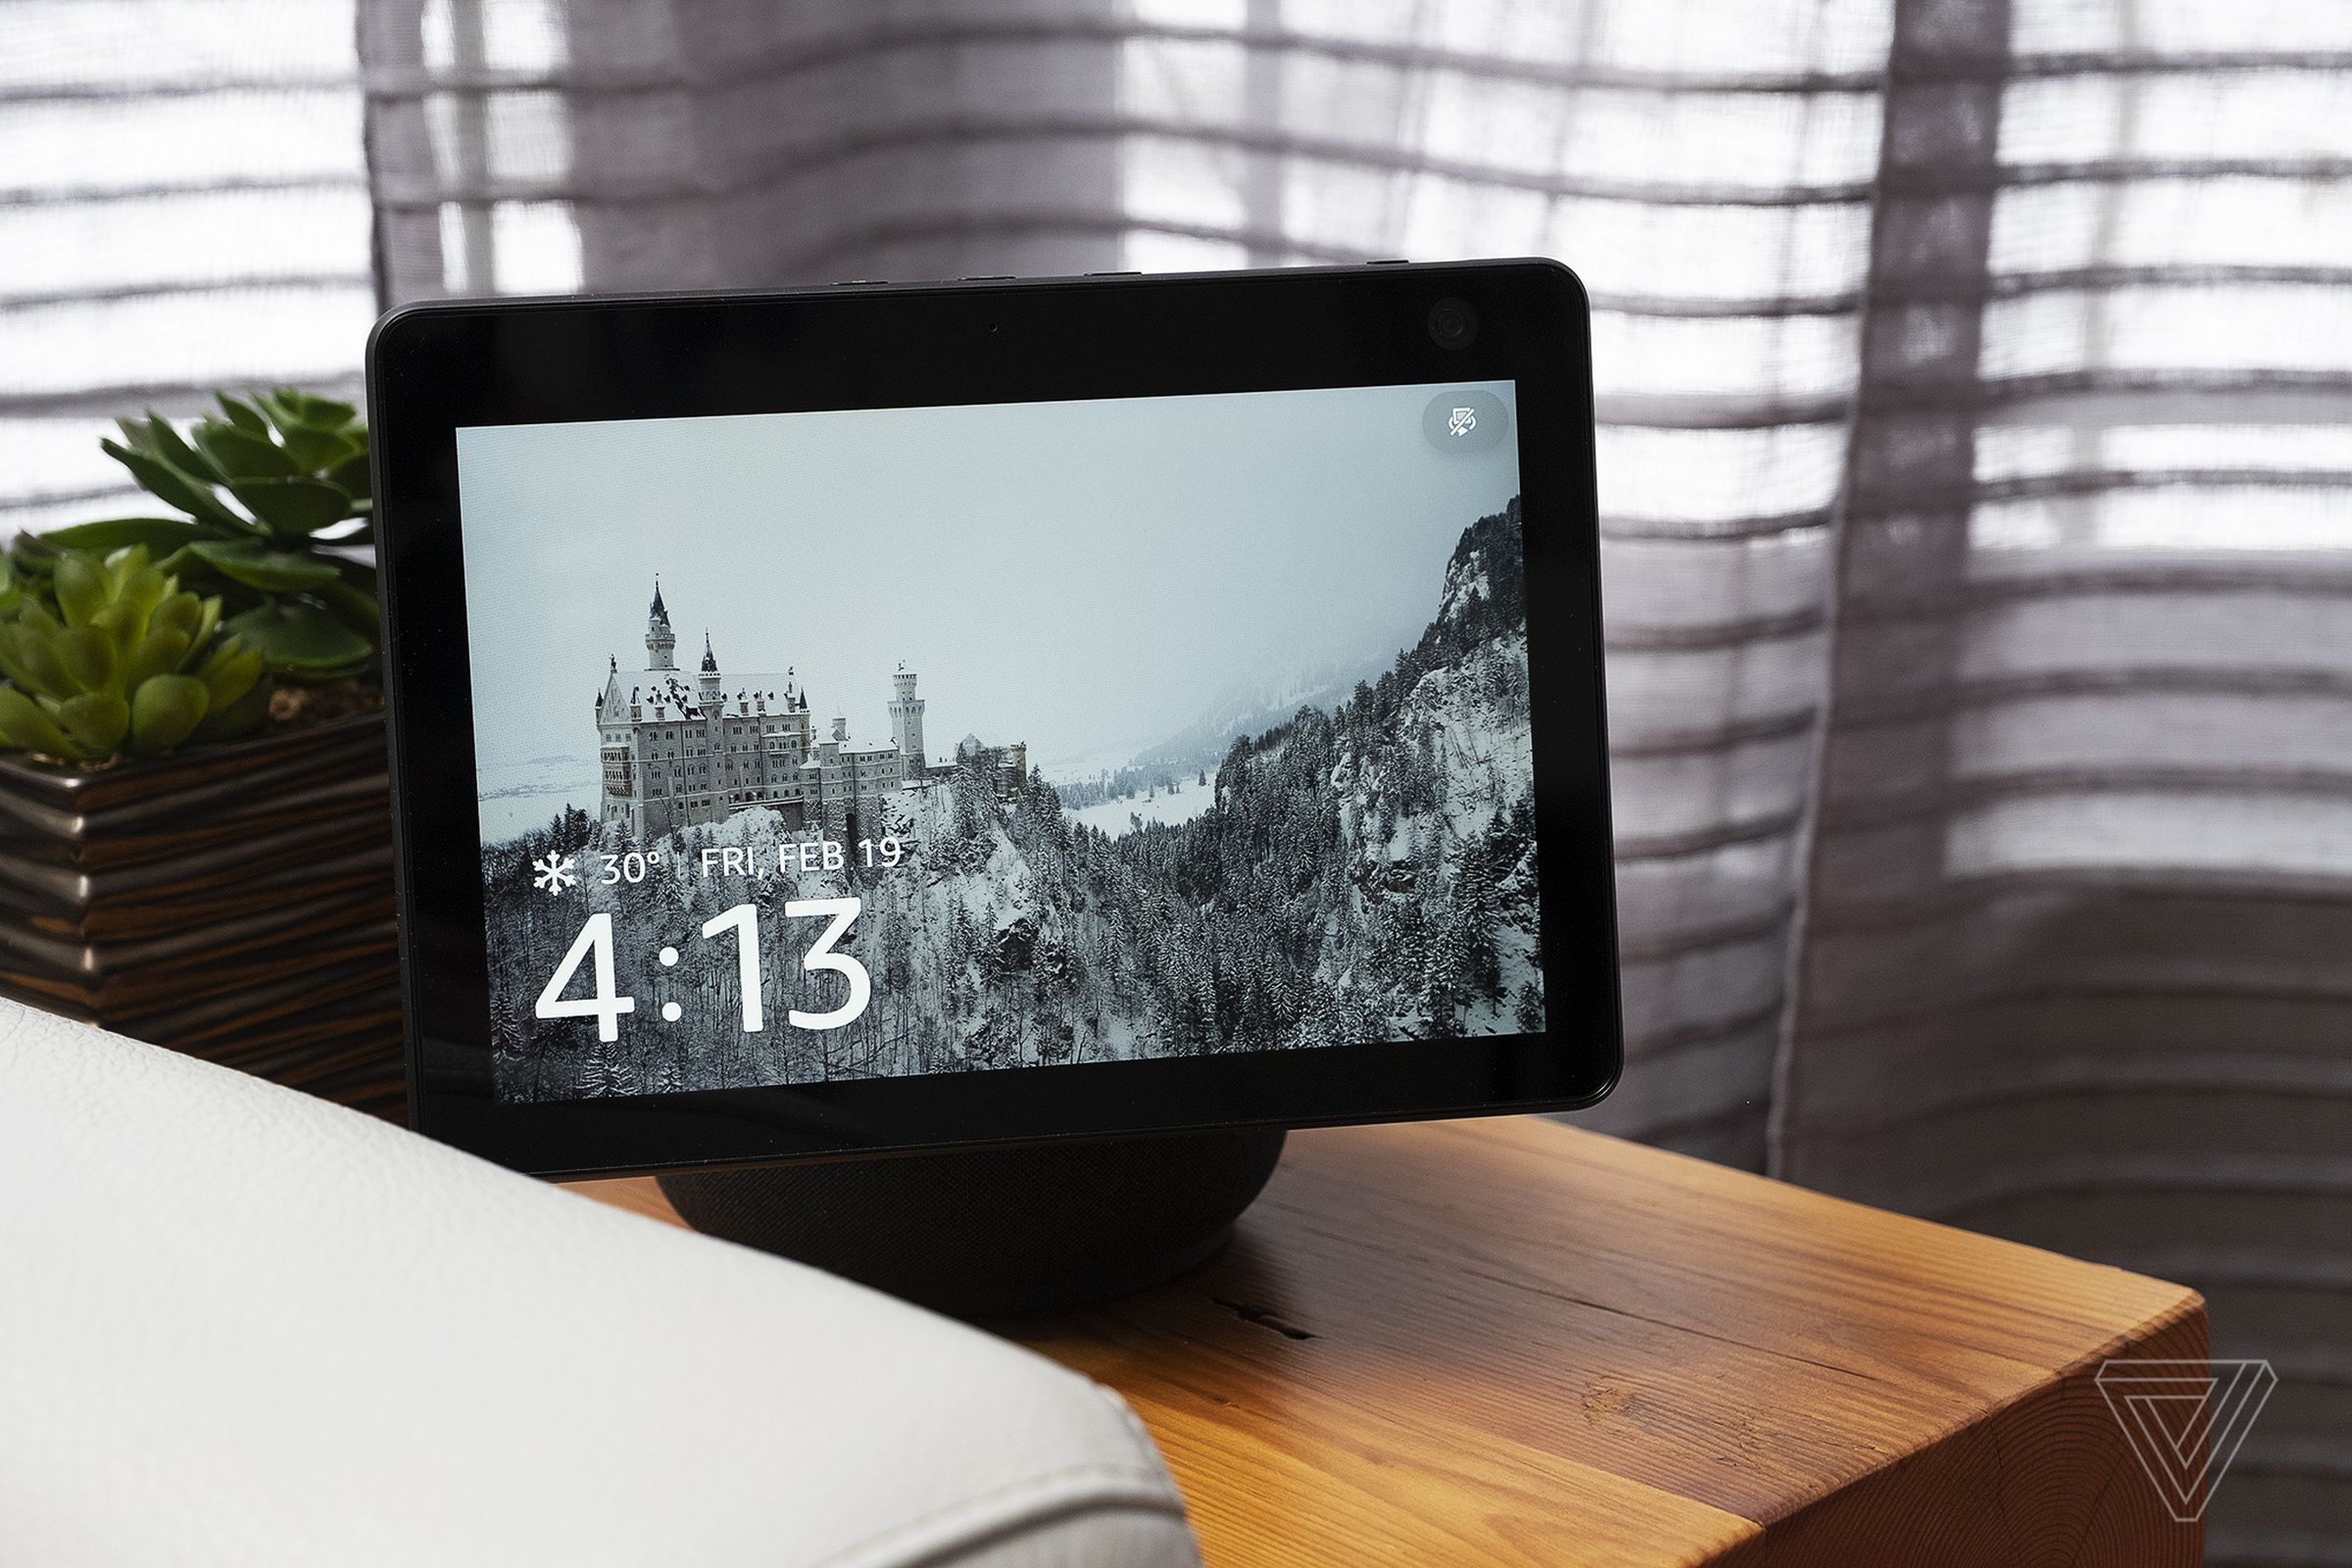 An image showing the Amazon Echo Show 10 on a table